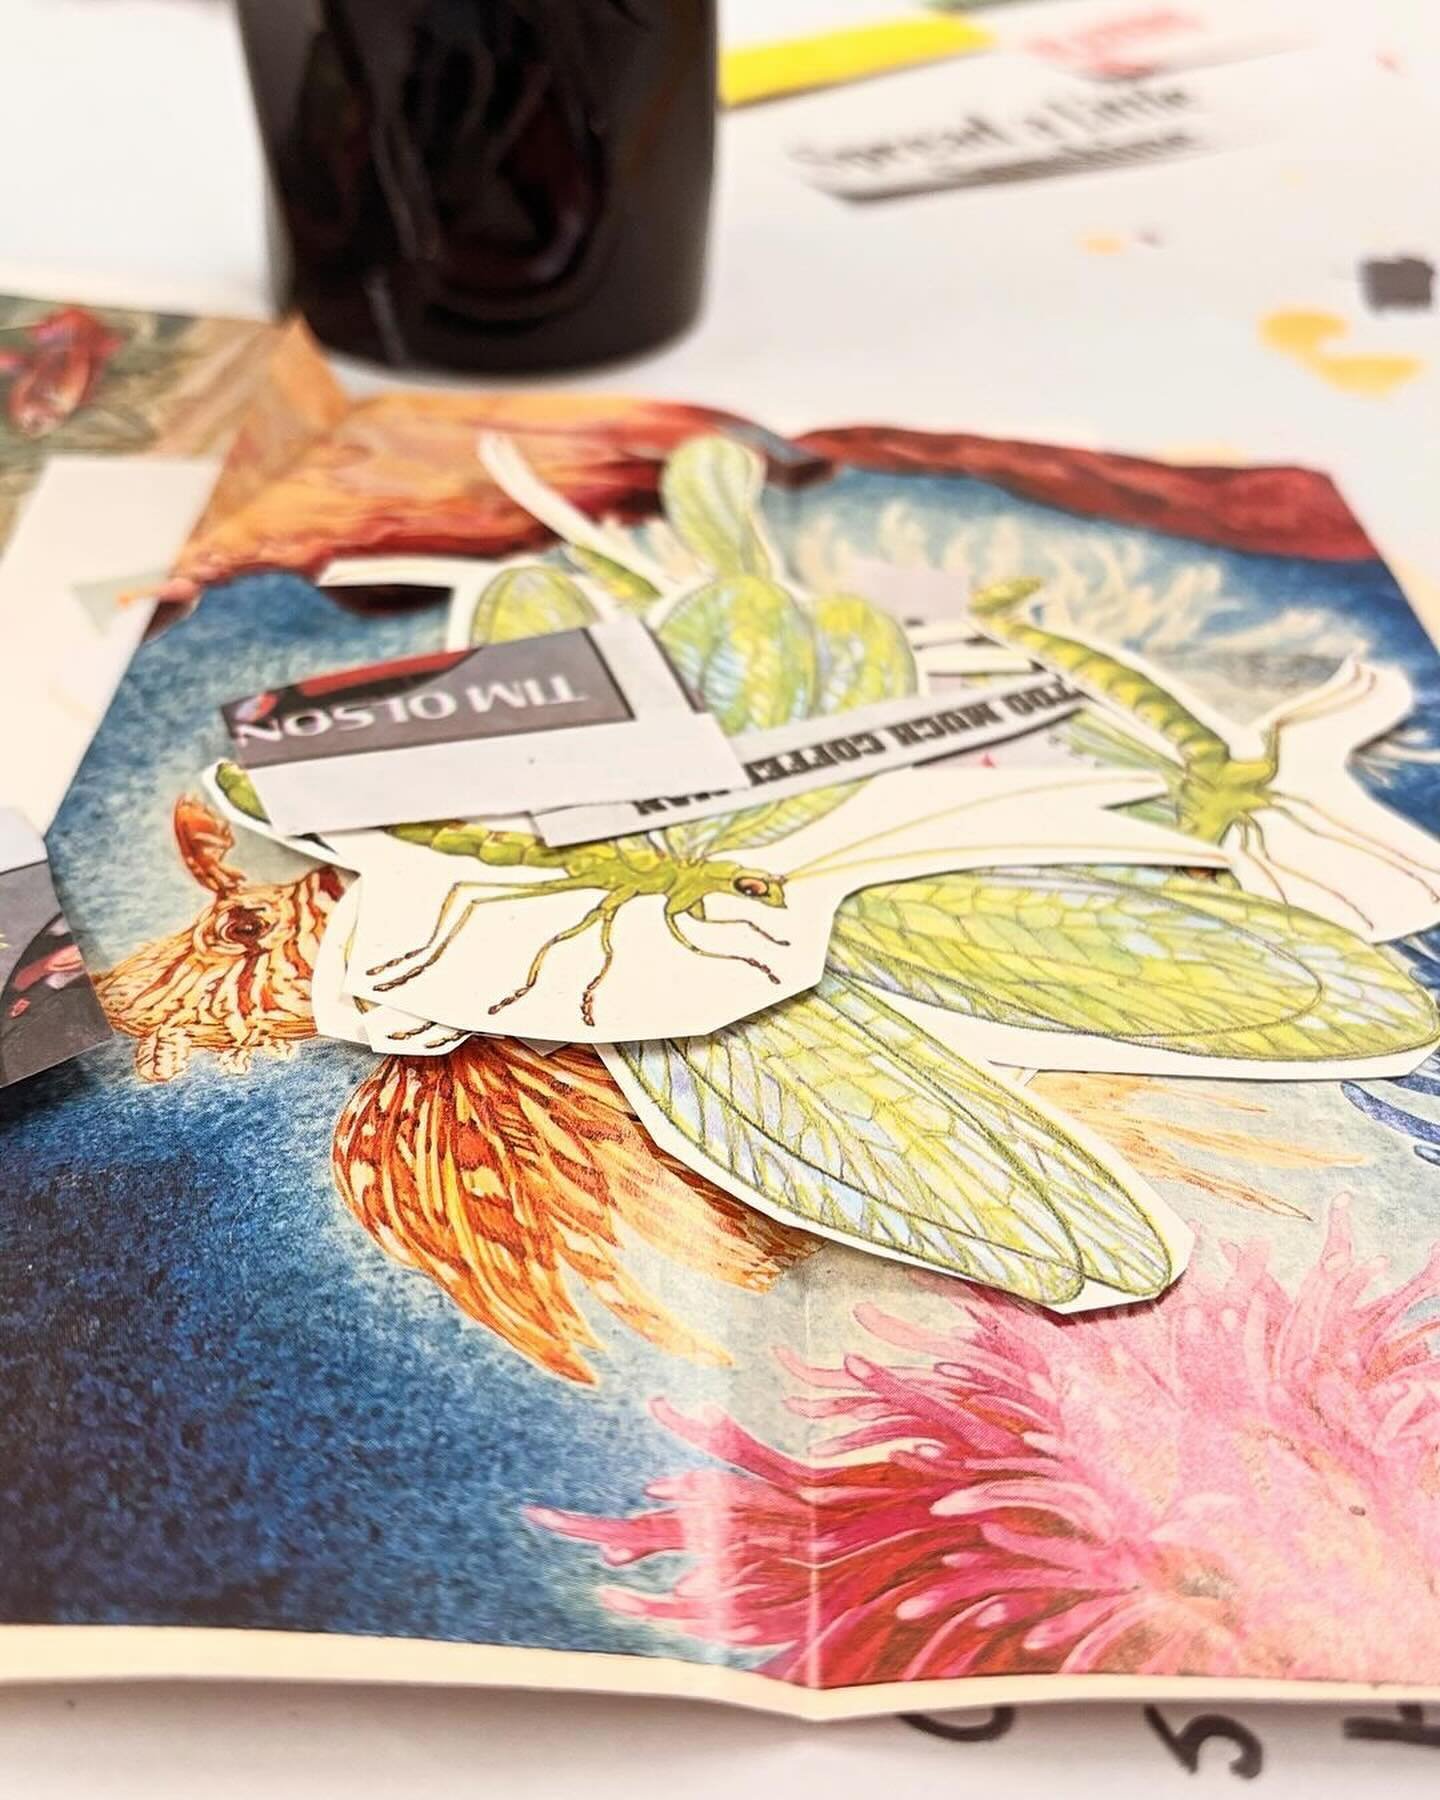 A glimpse into Ocean Stever&rsquo;s tender collage world ❤️

Repost from @seabluebeeart
&bull;
&ldquo;Here is part of the process to create my collage art. 

I choose subjects carefully with thought to each one&rsquo;s meaning and tone. I cut each pi